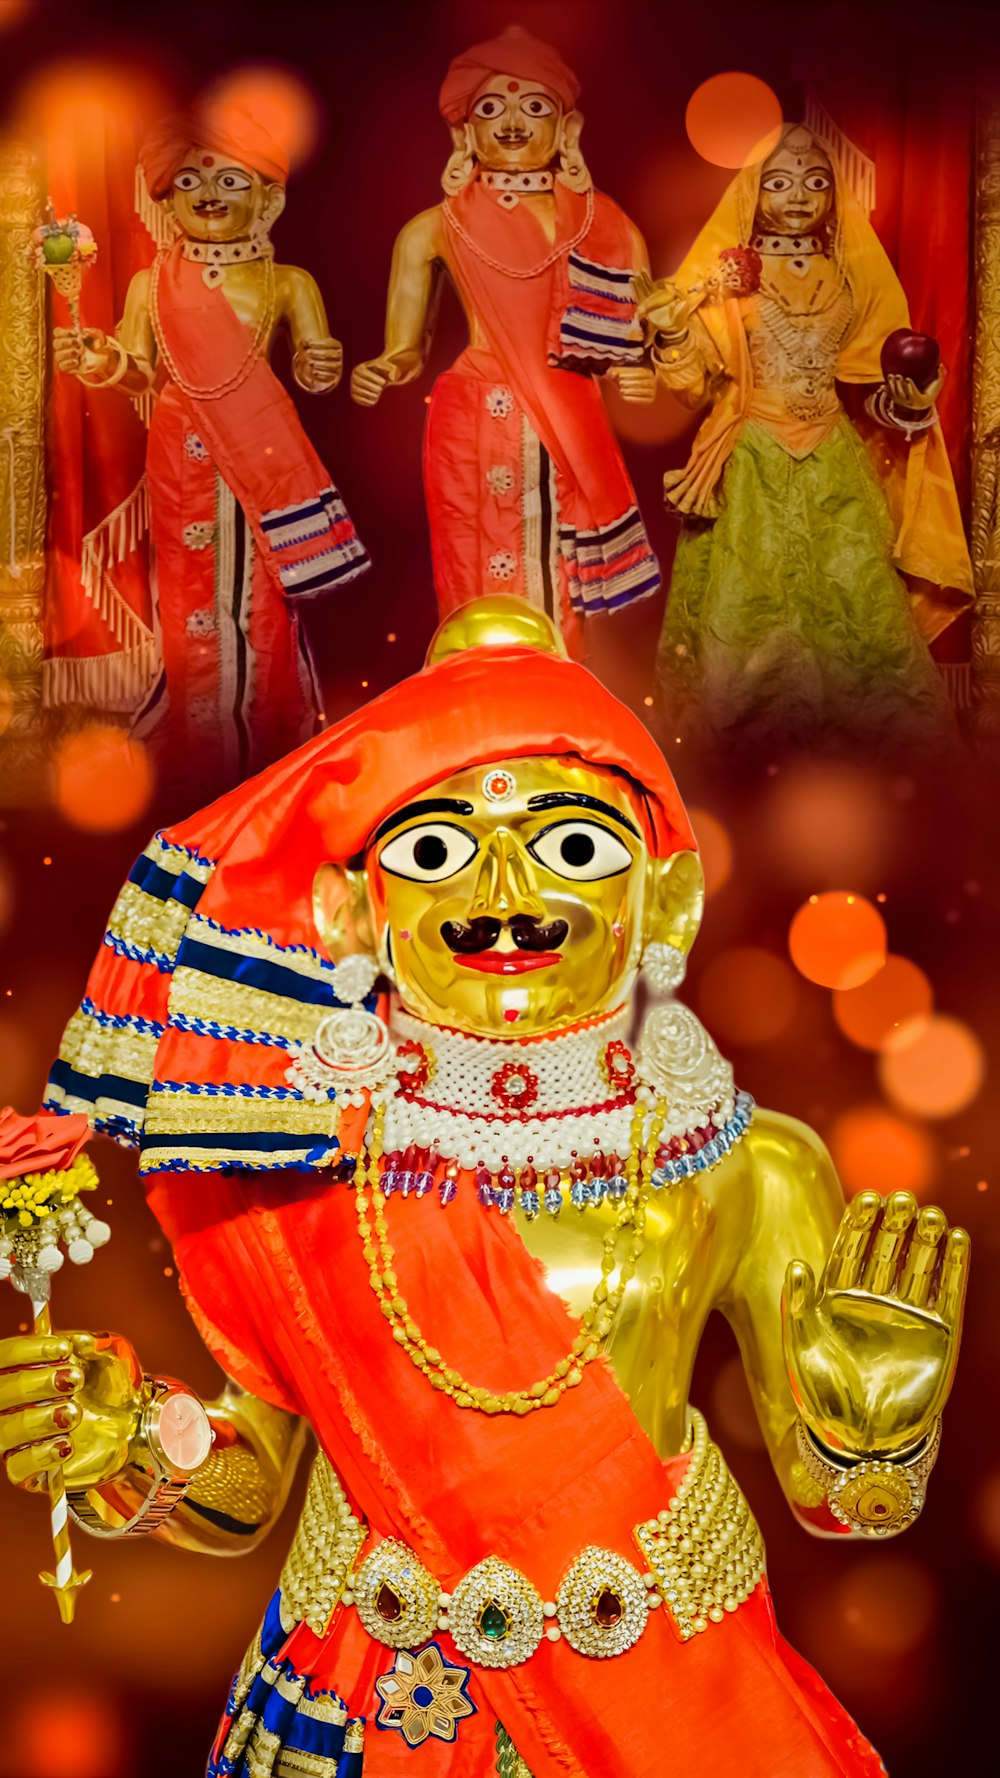 a golden statue of a man in a red outfit